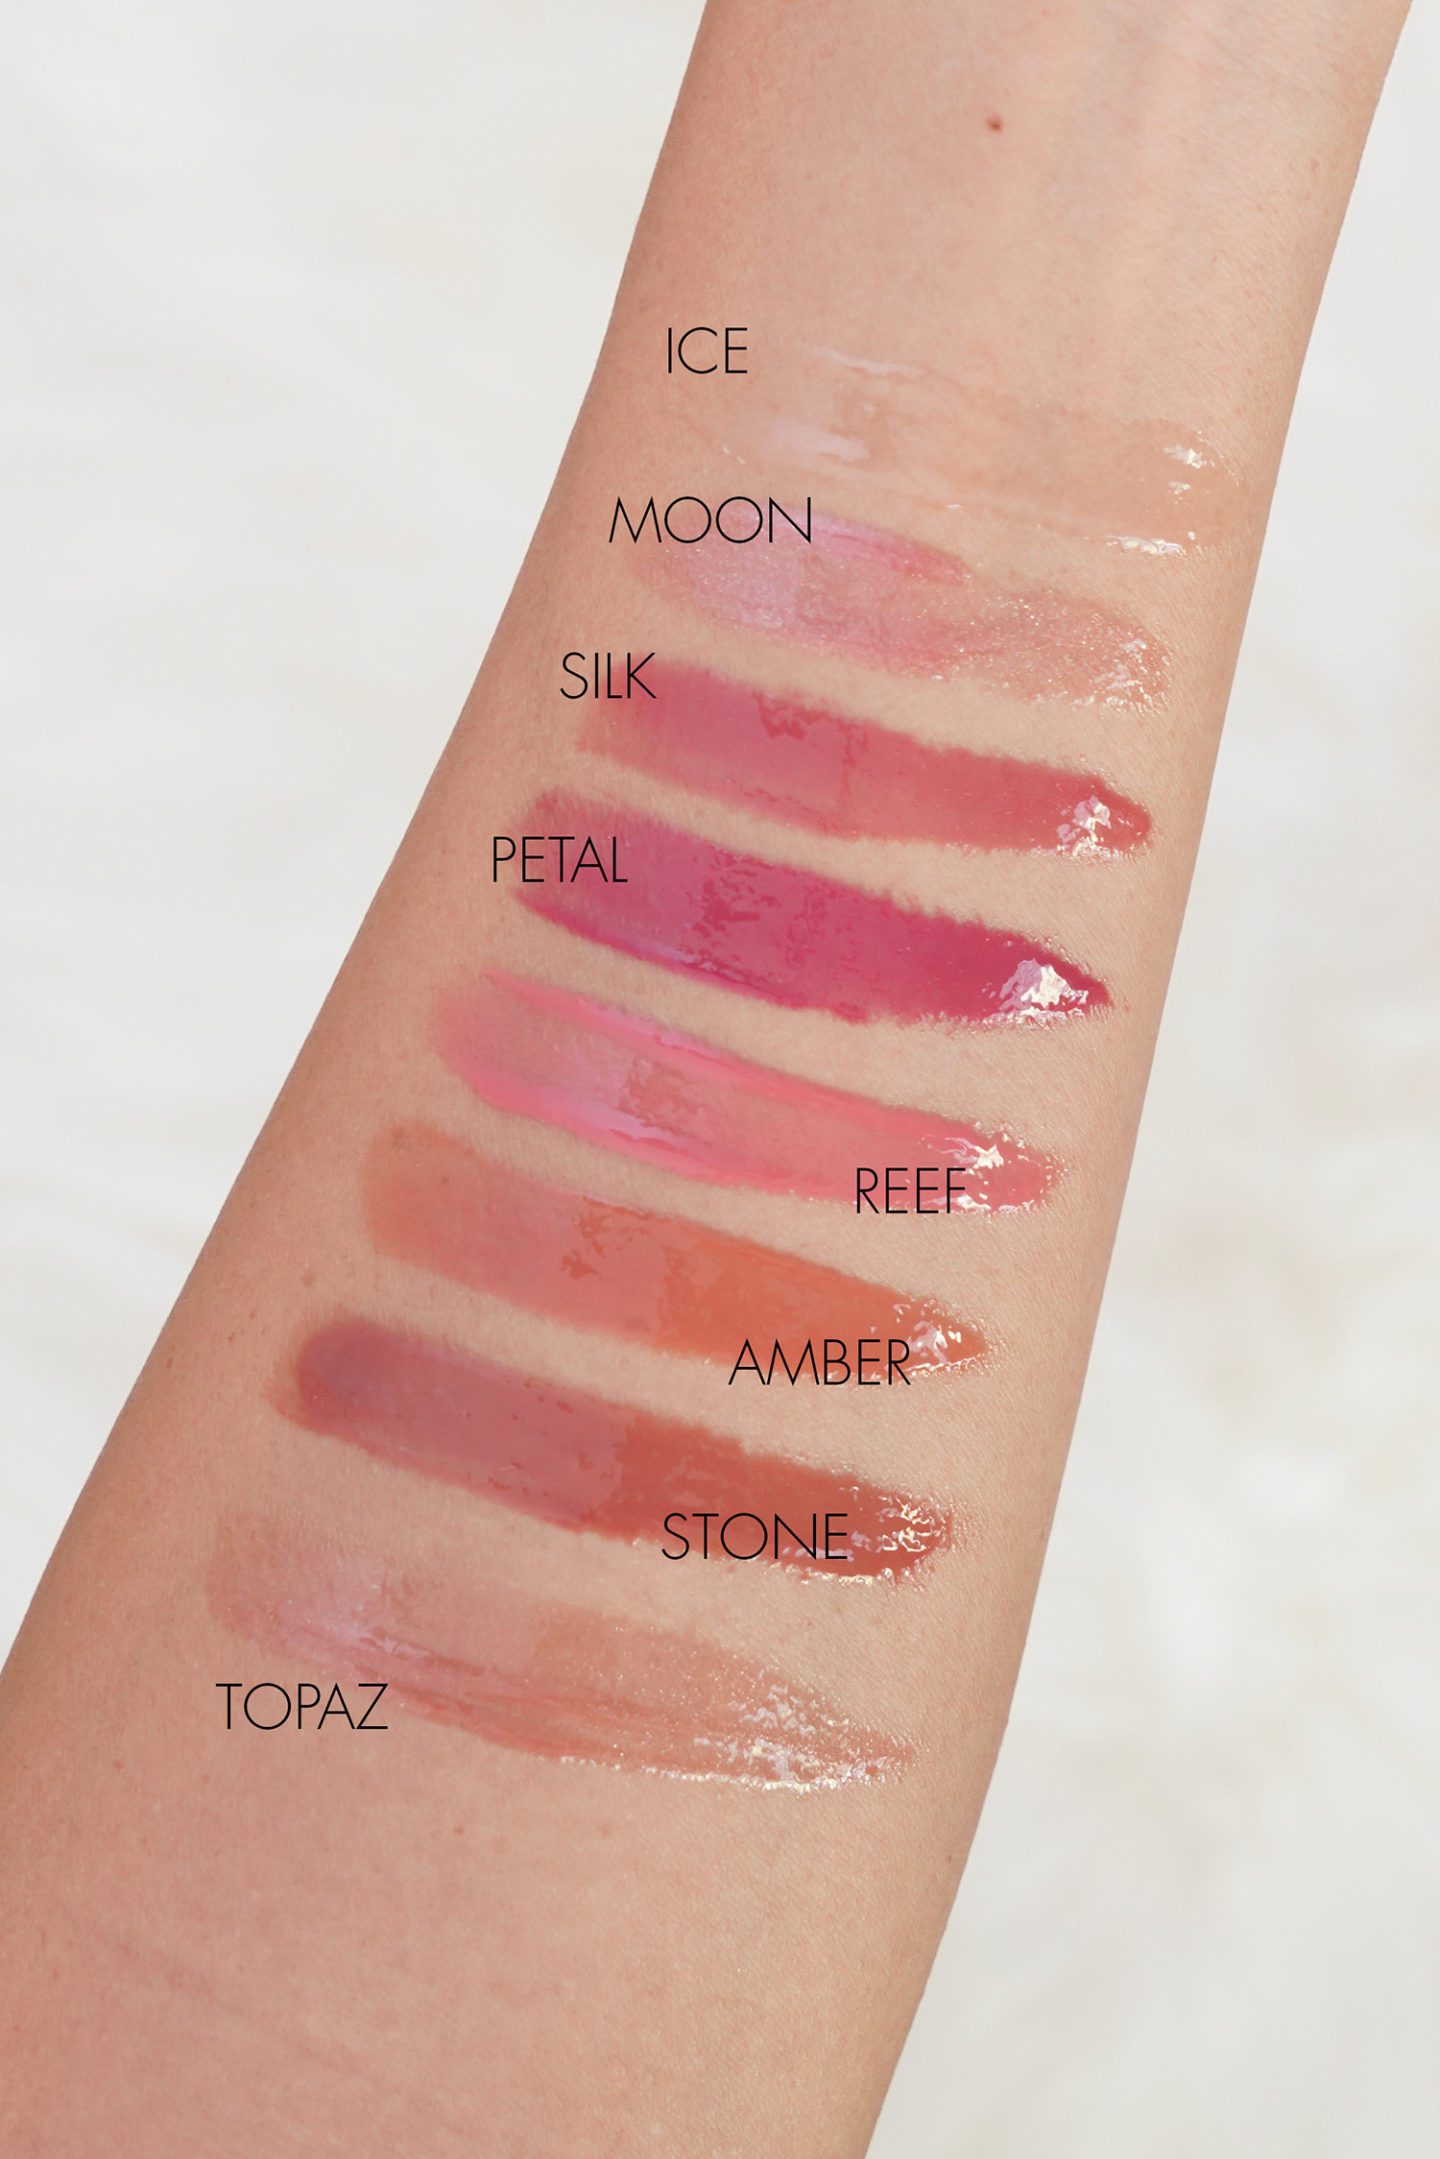 Maybelline Lifter Lip Gloss Swatches